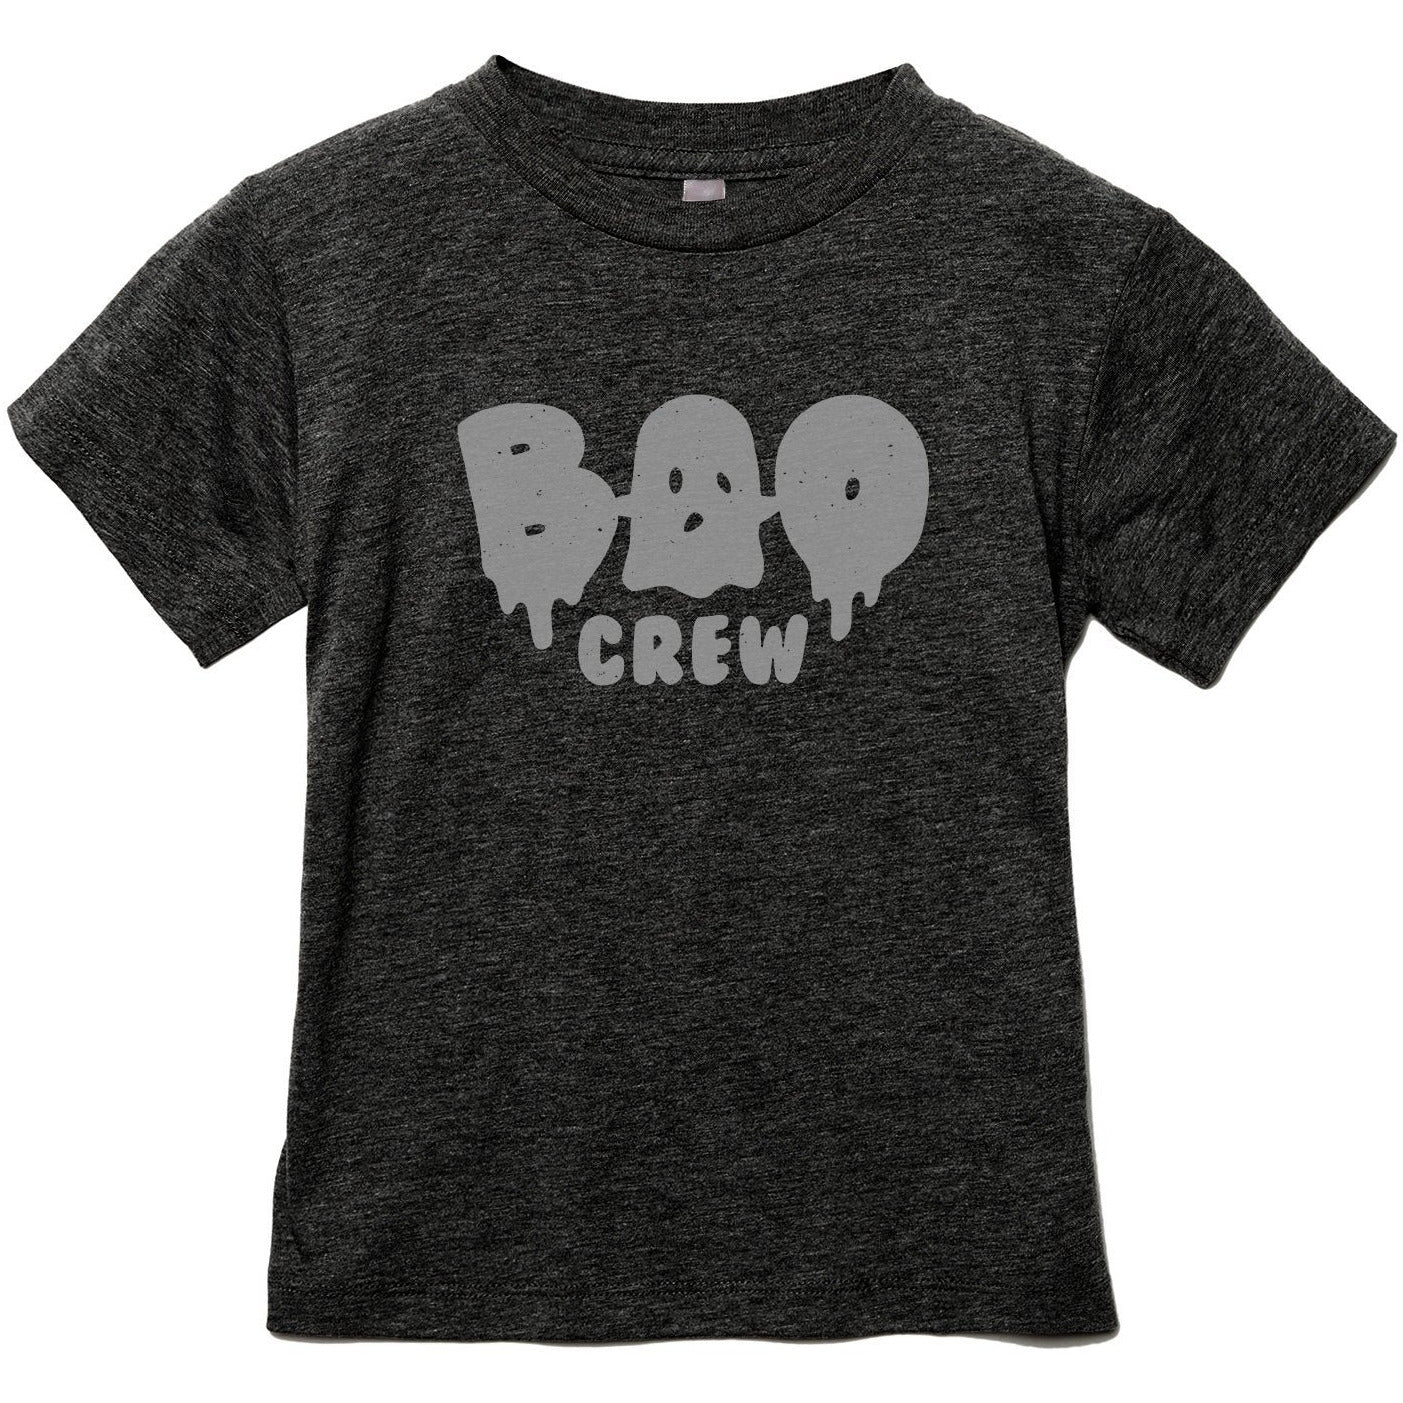 Boo Crew Toddler's Go-To Crewneck Tee Charcoal